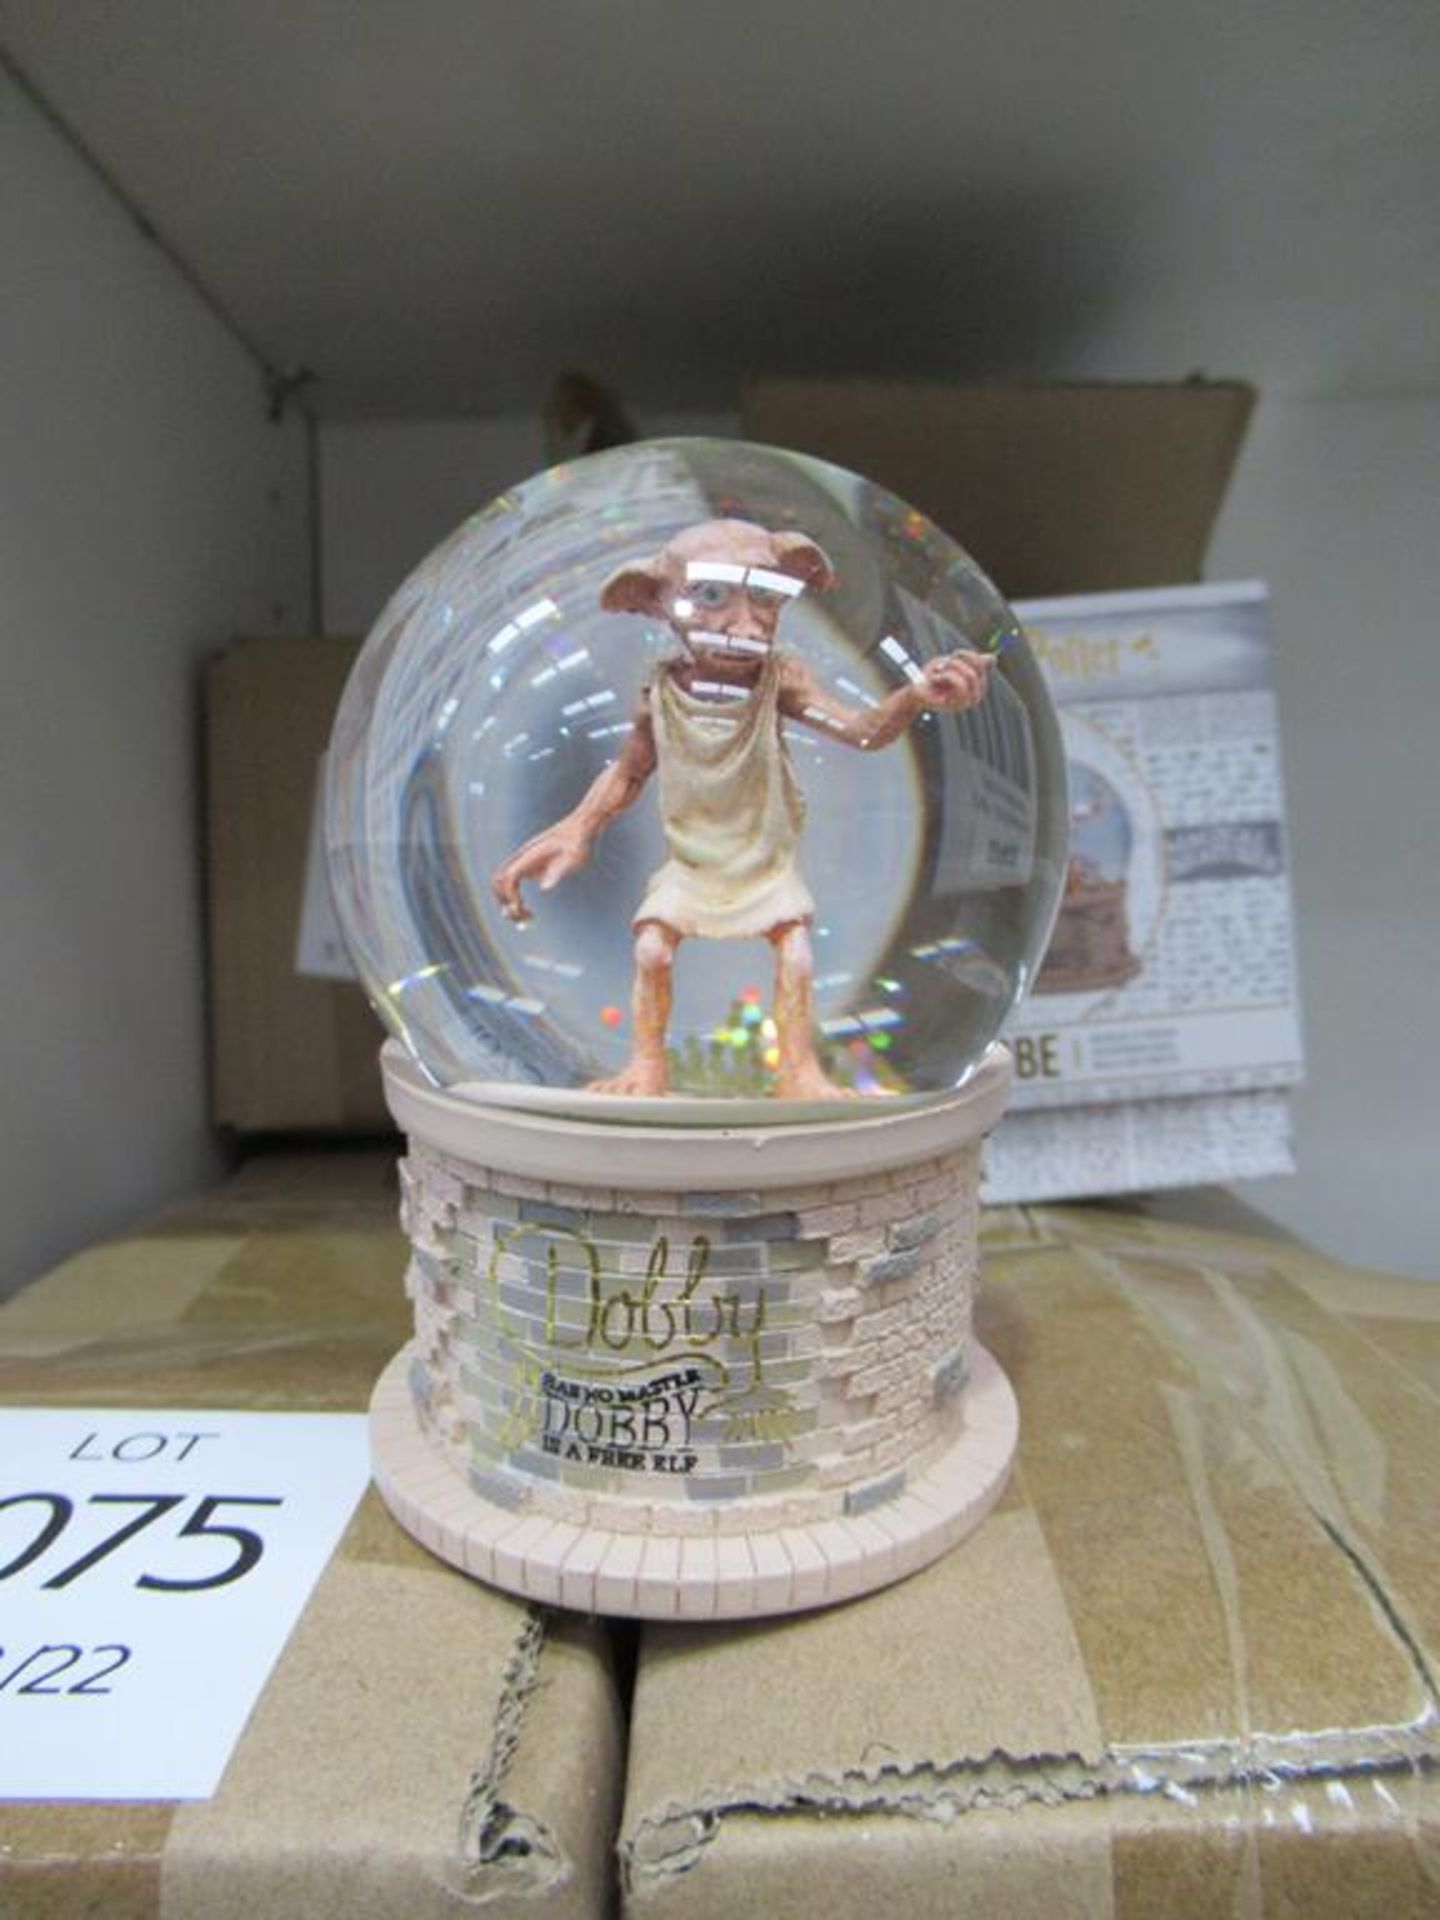 8x Harry Potter Themed Snow Globes - Image 2 of 3